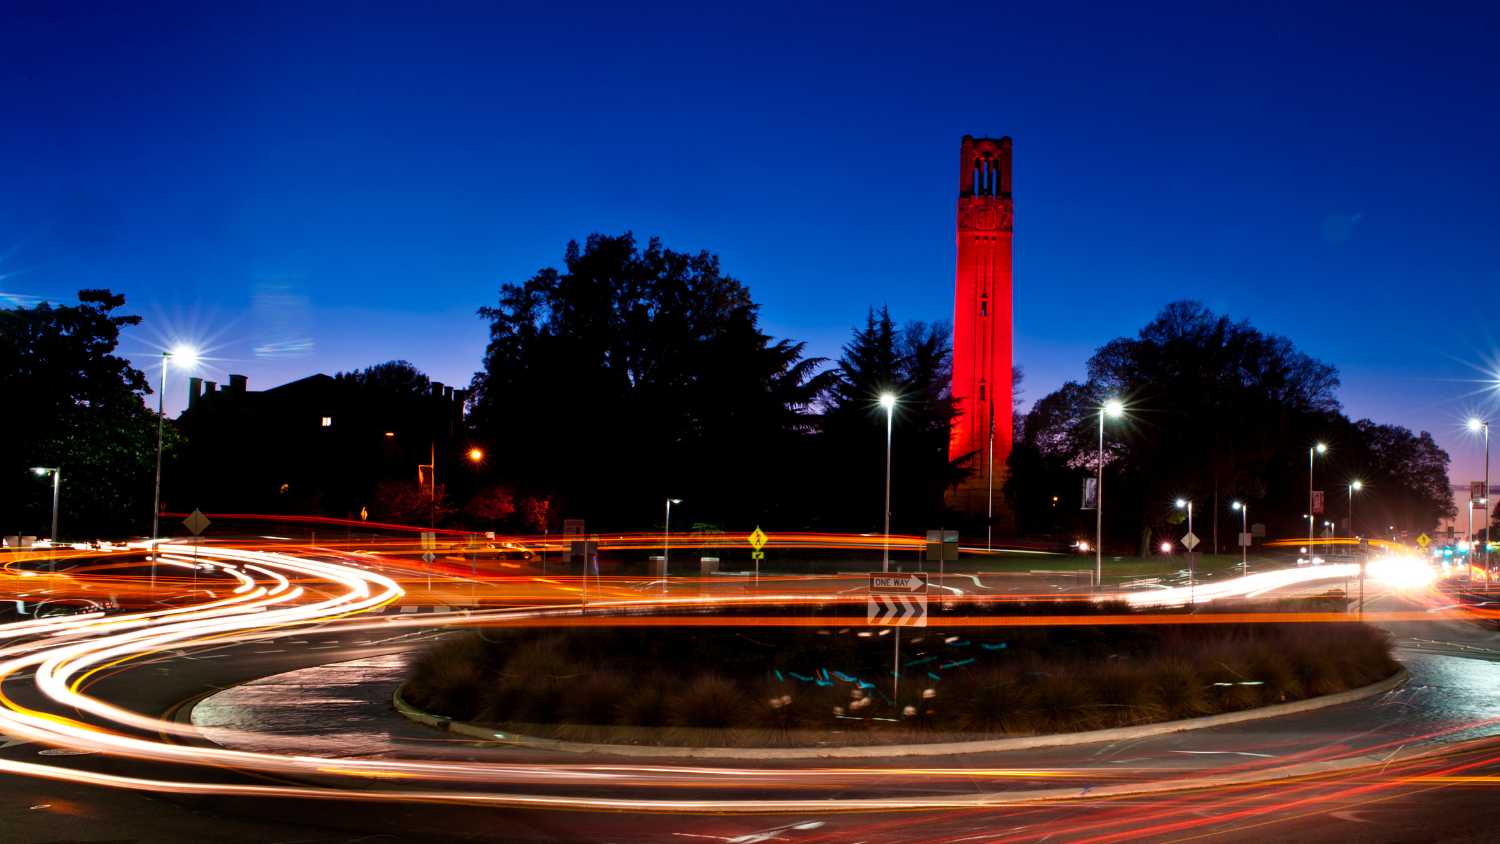 NC State belltower glows red at night